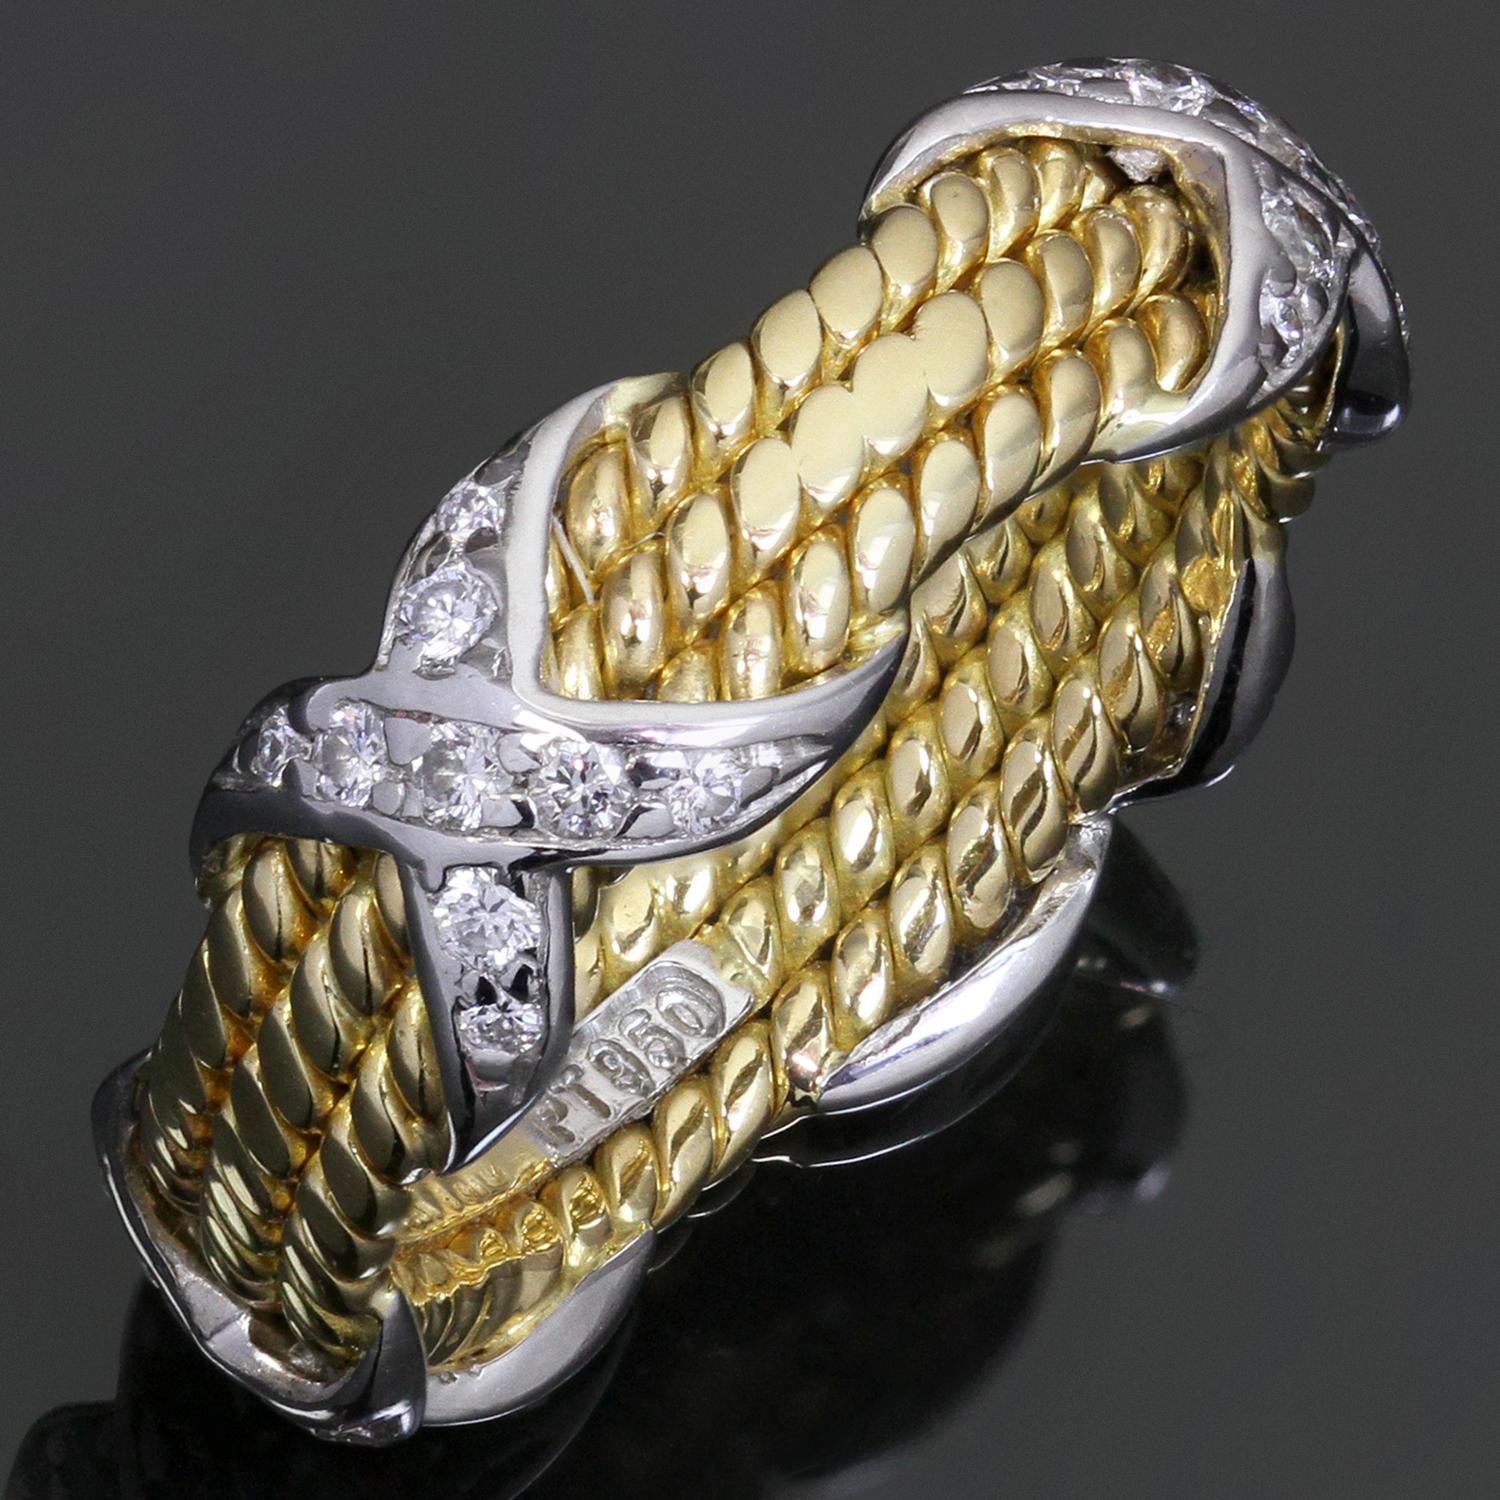 This classic Tiffany & Co. ring was designed by Jean Schlumberger and features a 3-row rope design crafted in 18k yellow gold and accented with 4 950 platinum X motifs set with round brilliant D-F VVS2-VS1 diamonds weighing an estimated 0.28 carats.